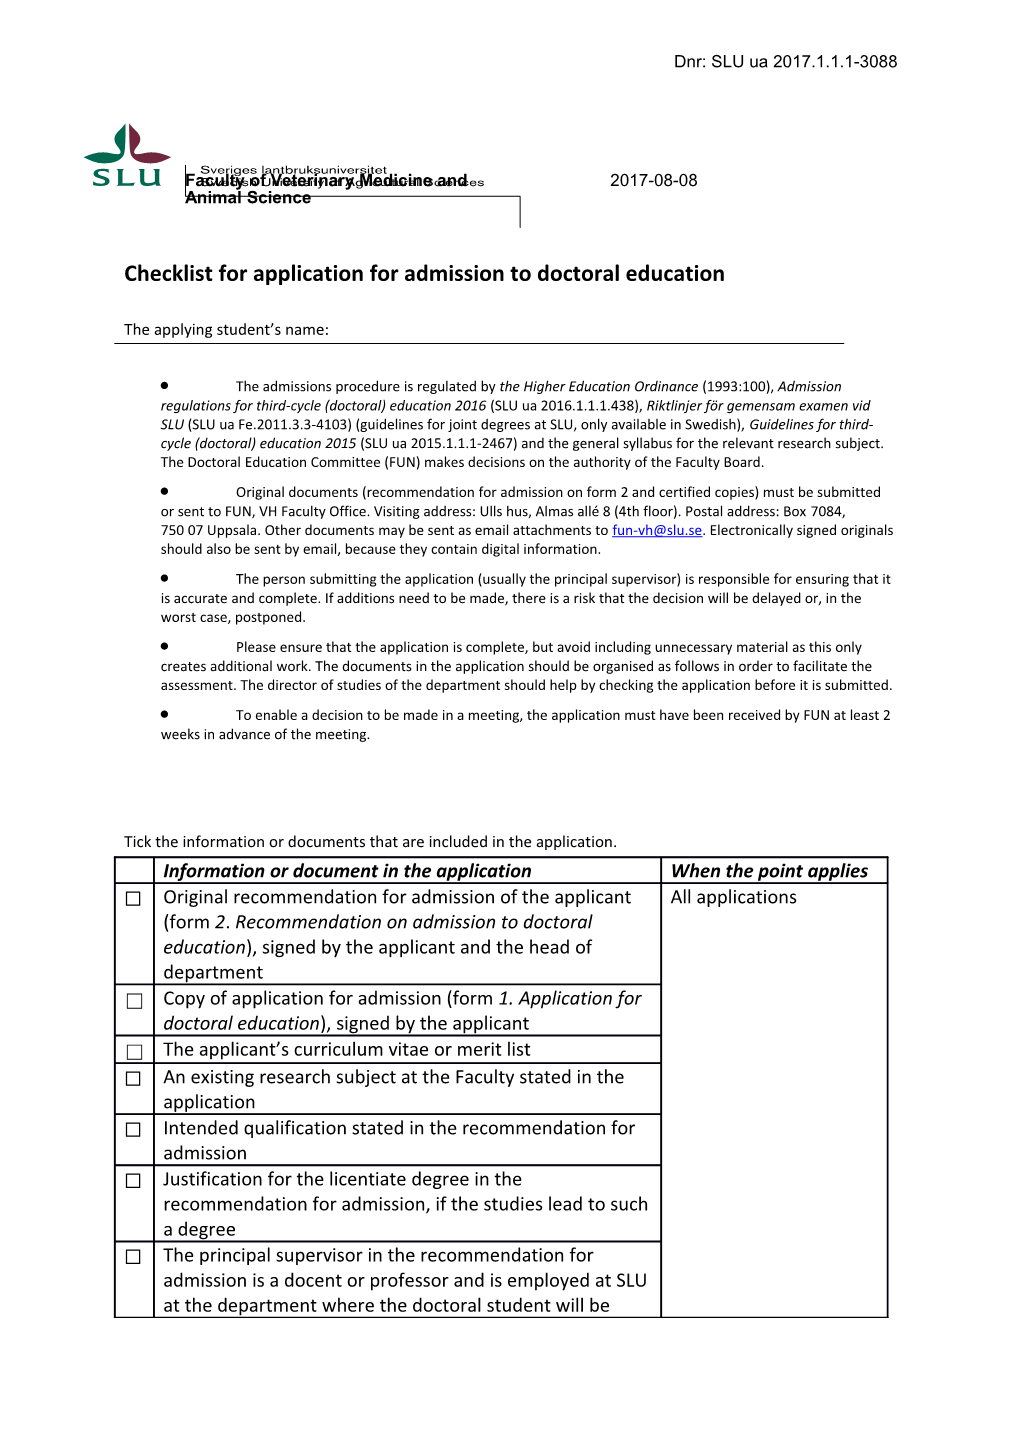 Checklist for Application for Admission to Doctoral Education